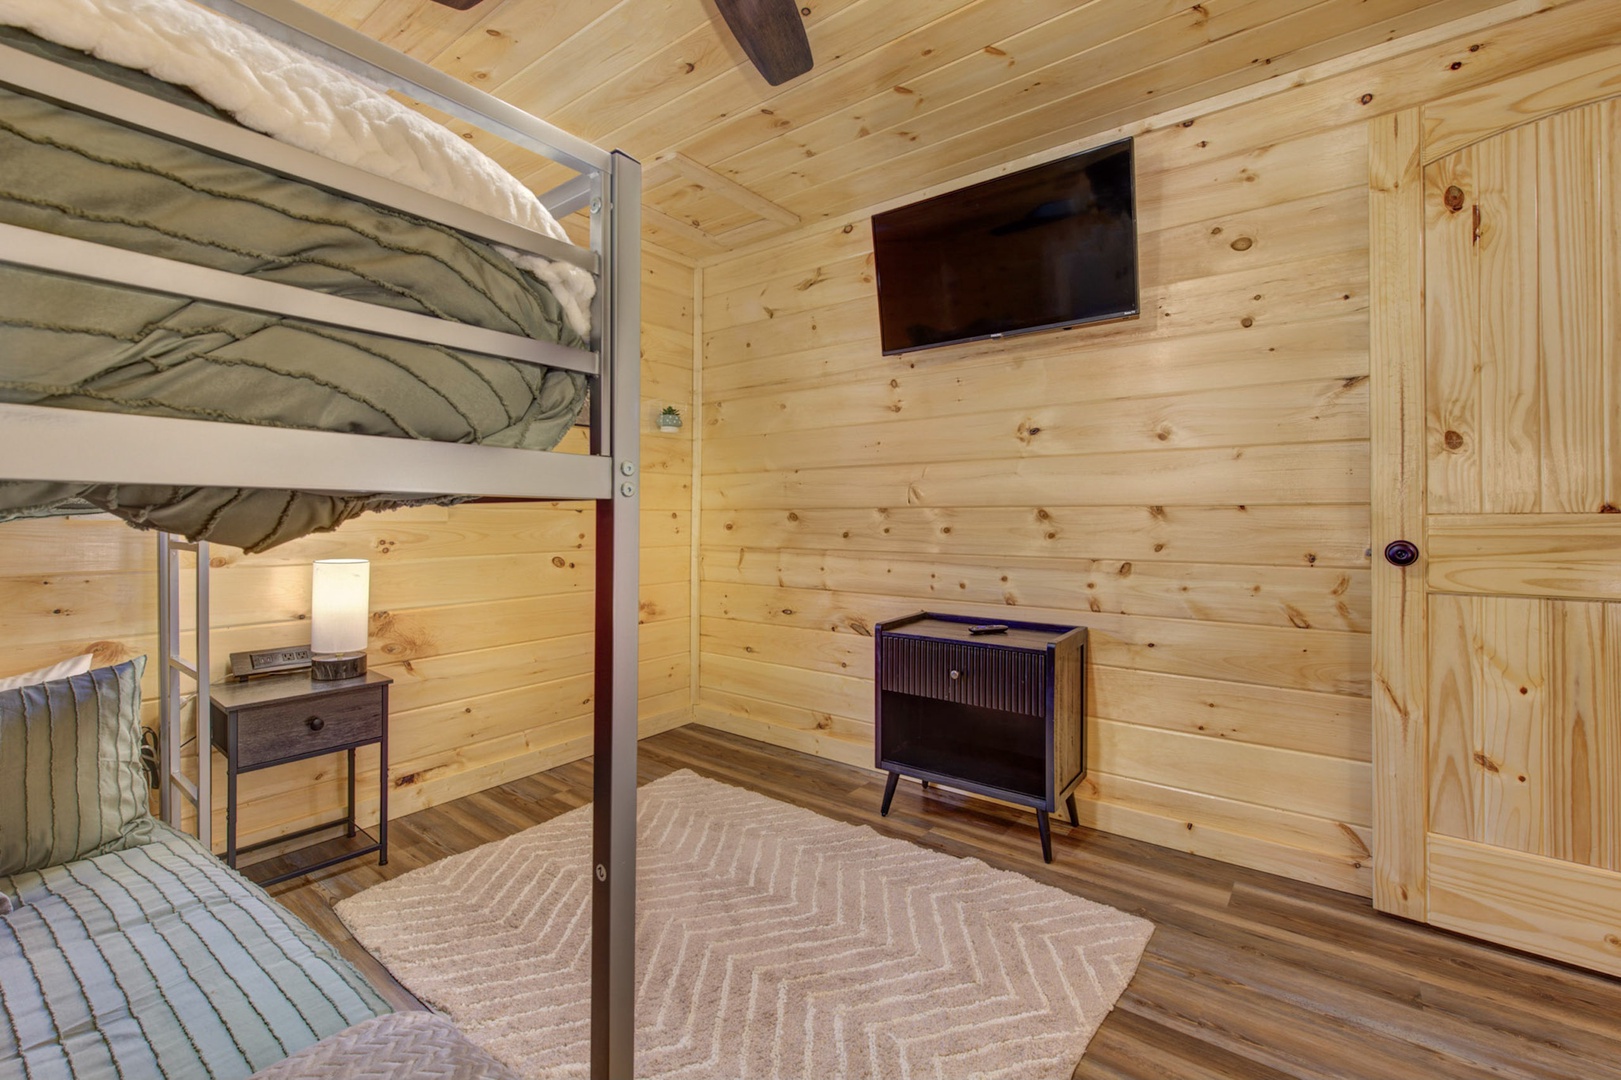 The third bedroom retreat contains a full over full bunk, TV & arcade area